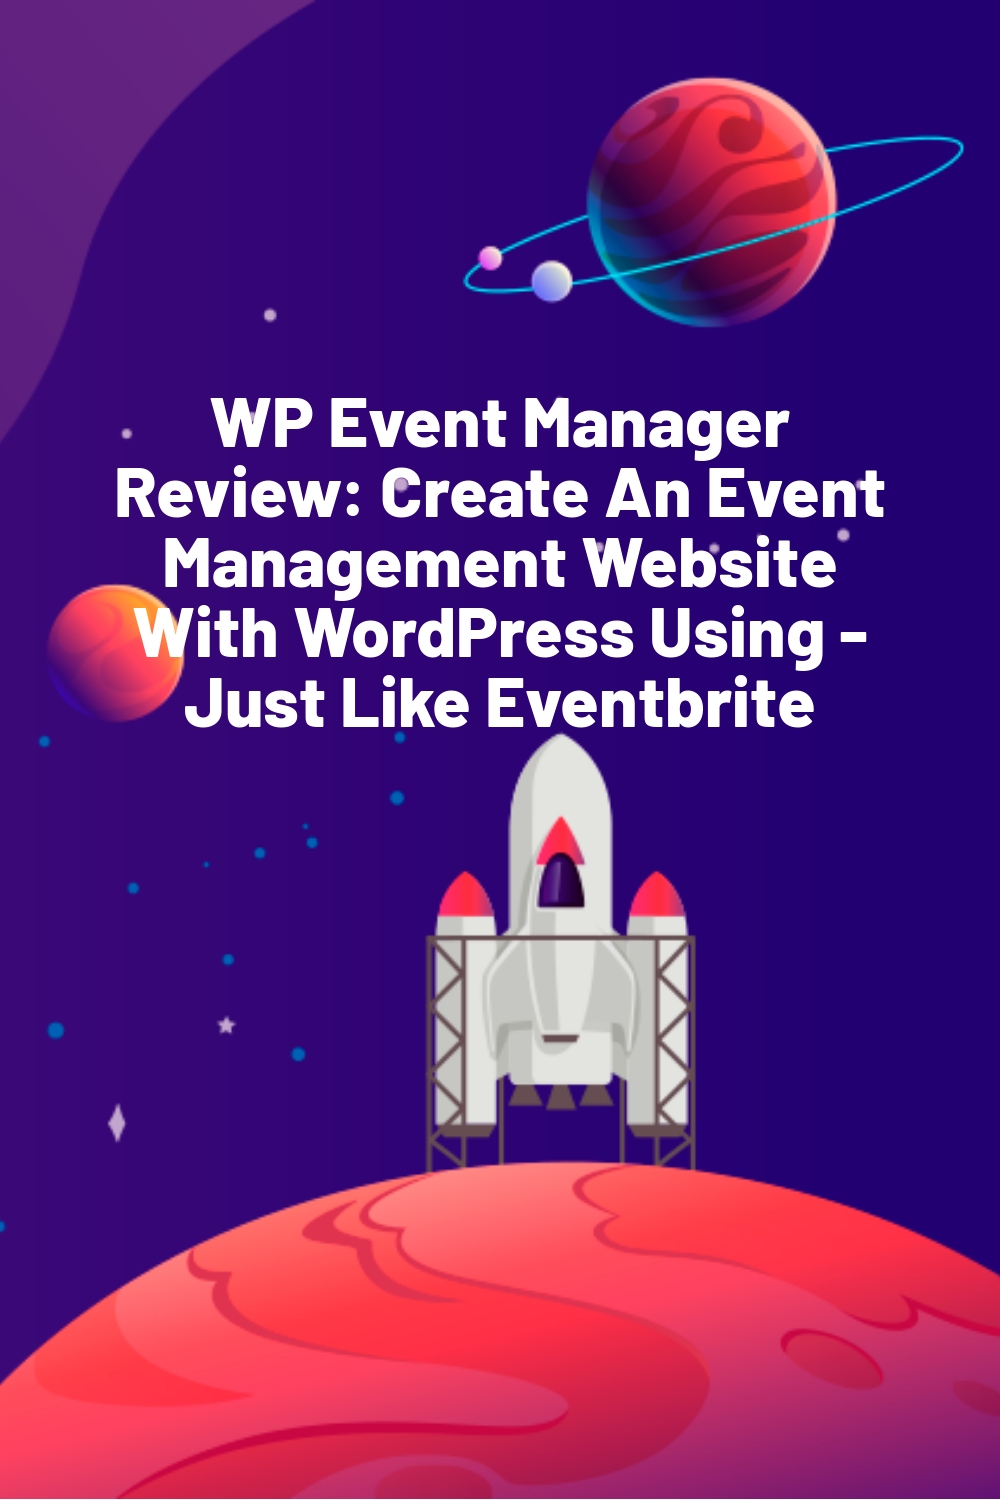 WP Event Manager Review: Create An Event Management Website With WordPress Using – Just Like Eventbrite